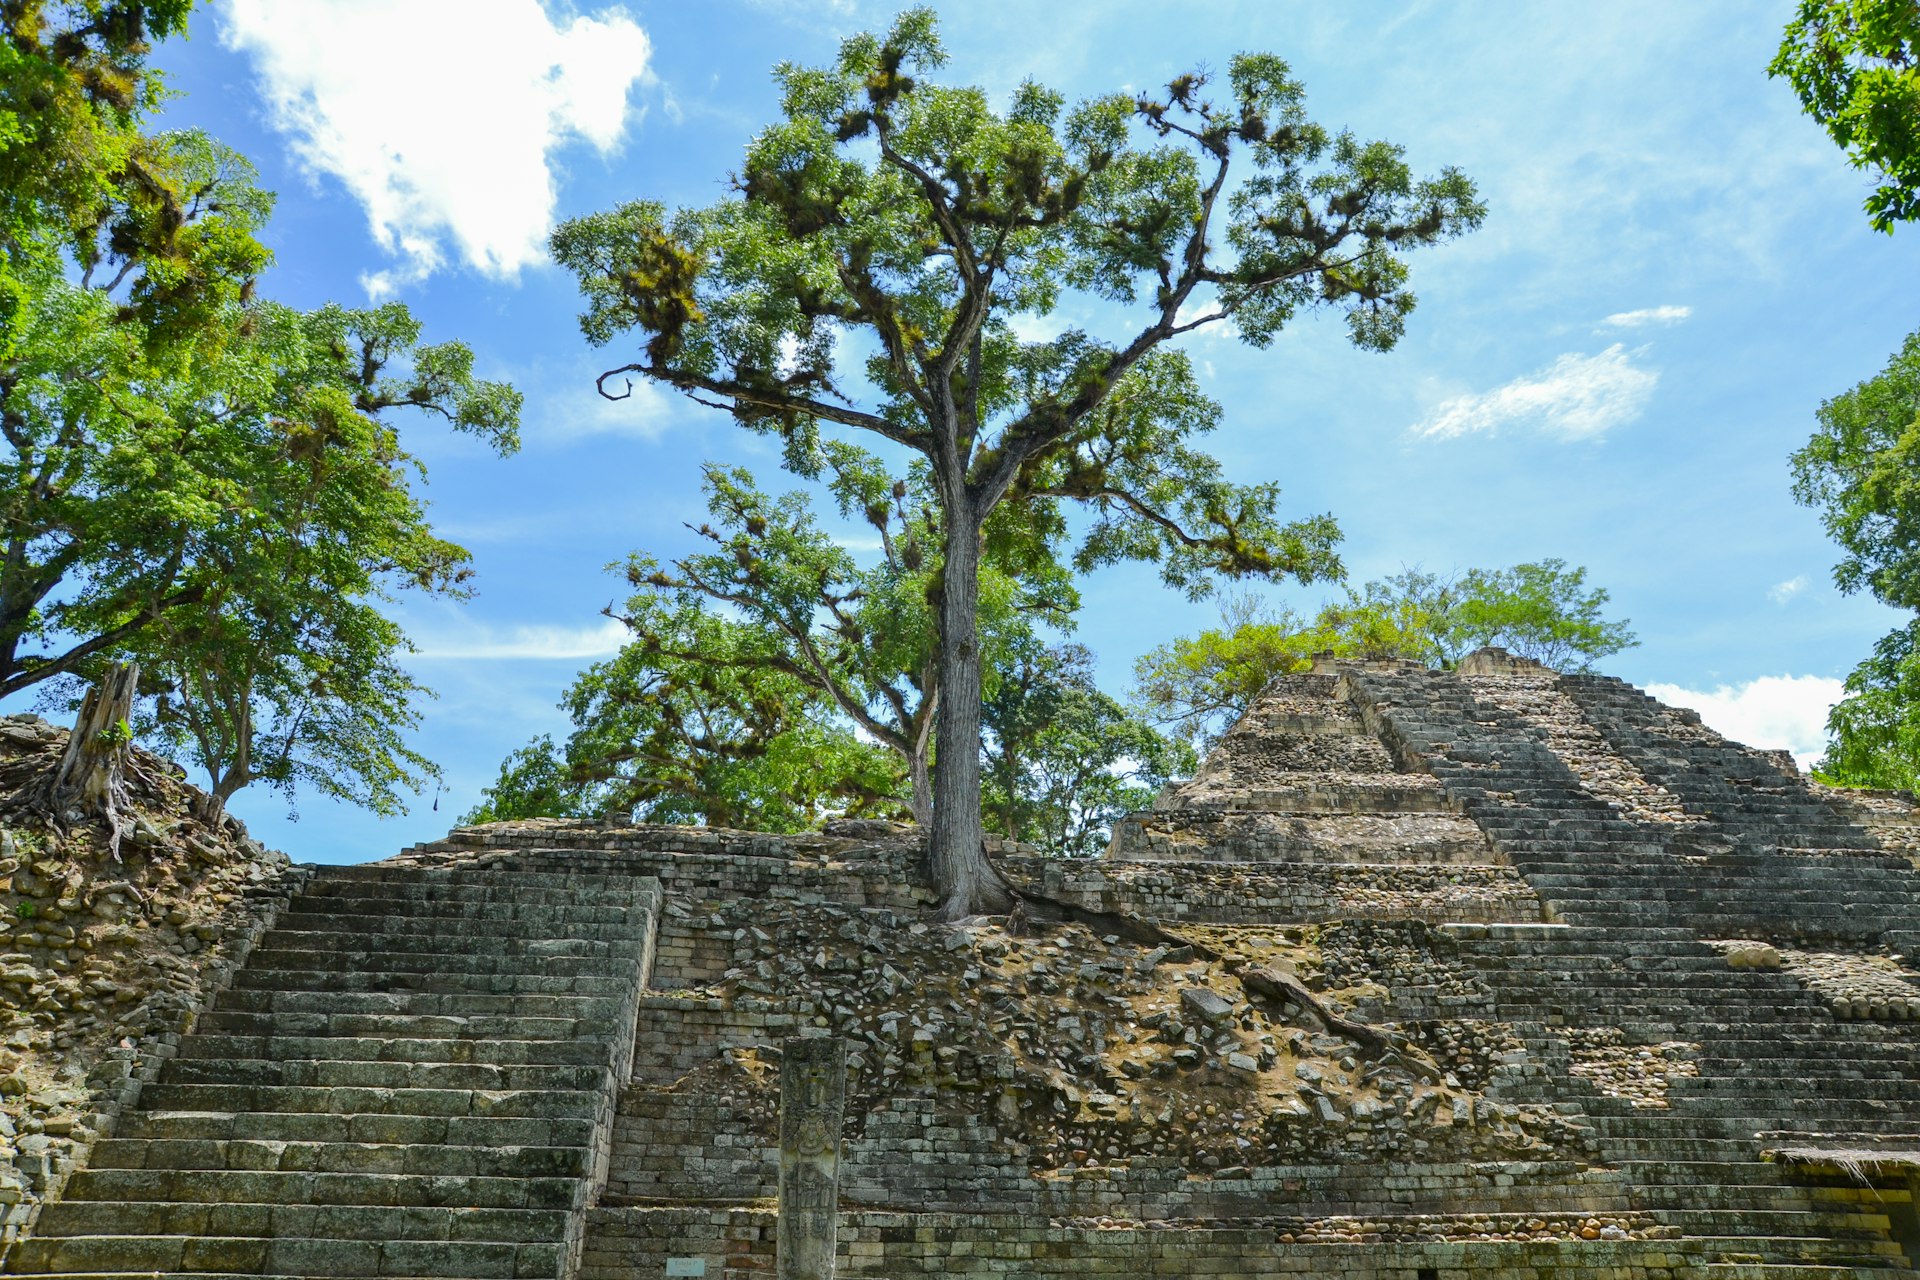 Trees growing up from a ruined pyramid at Copán, Honduras